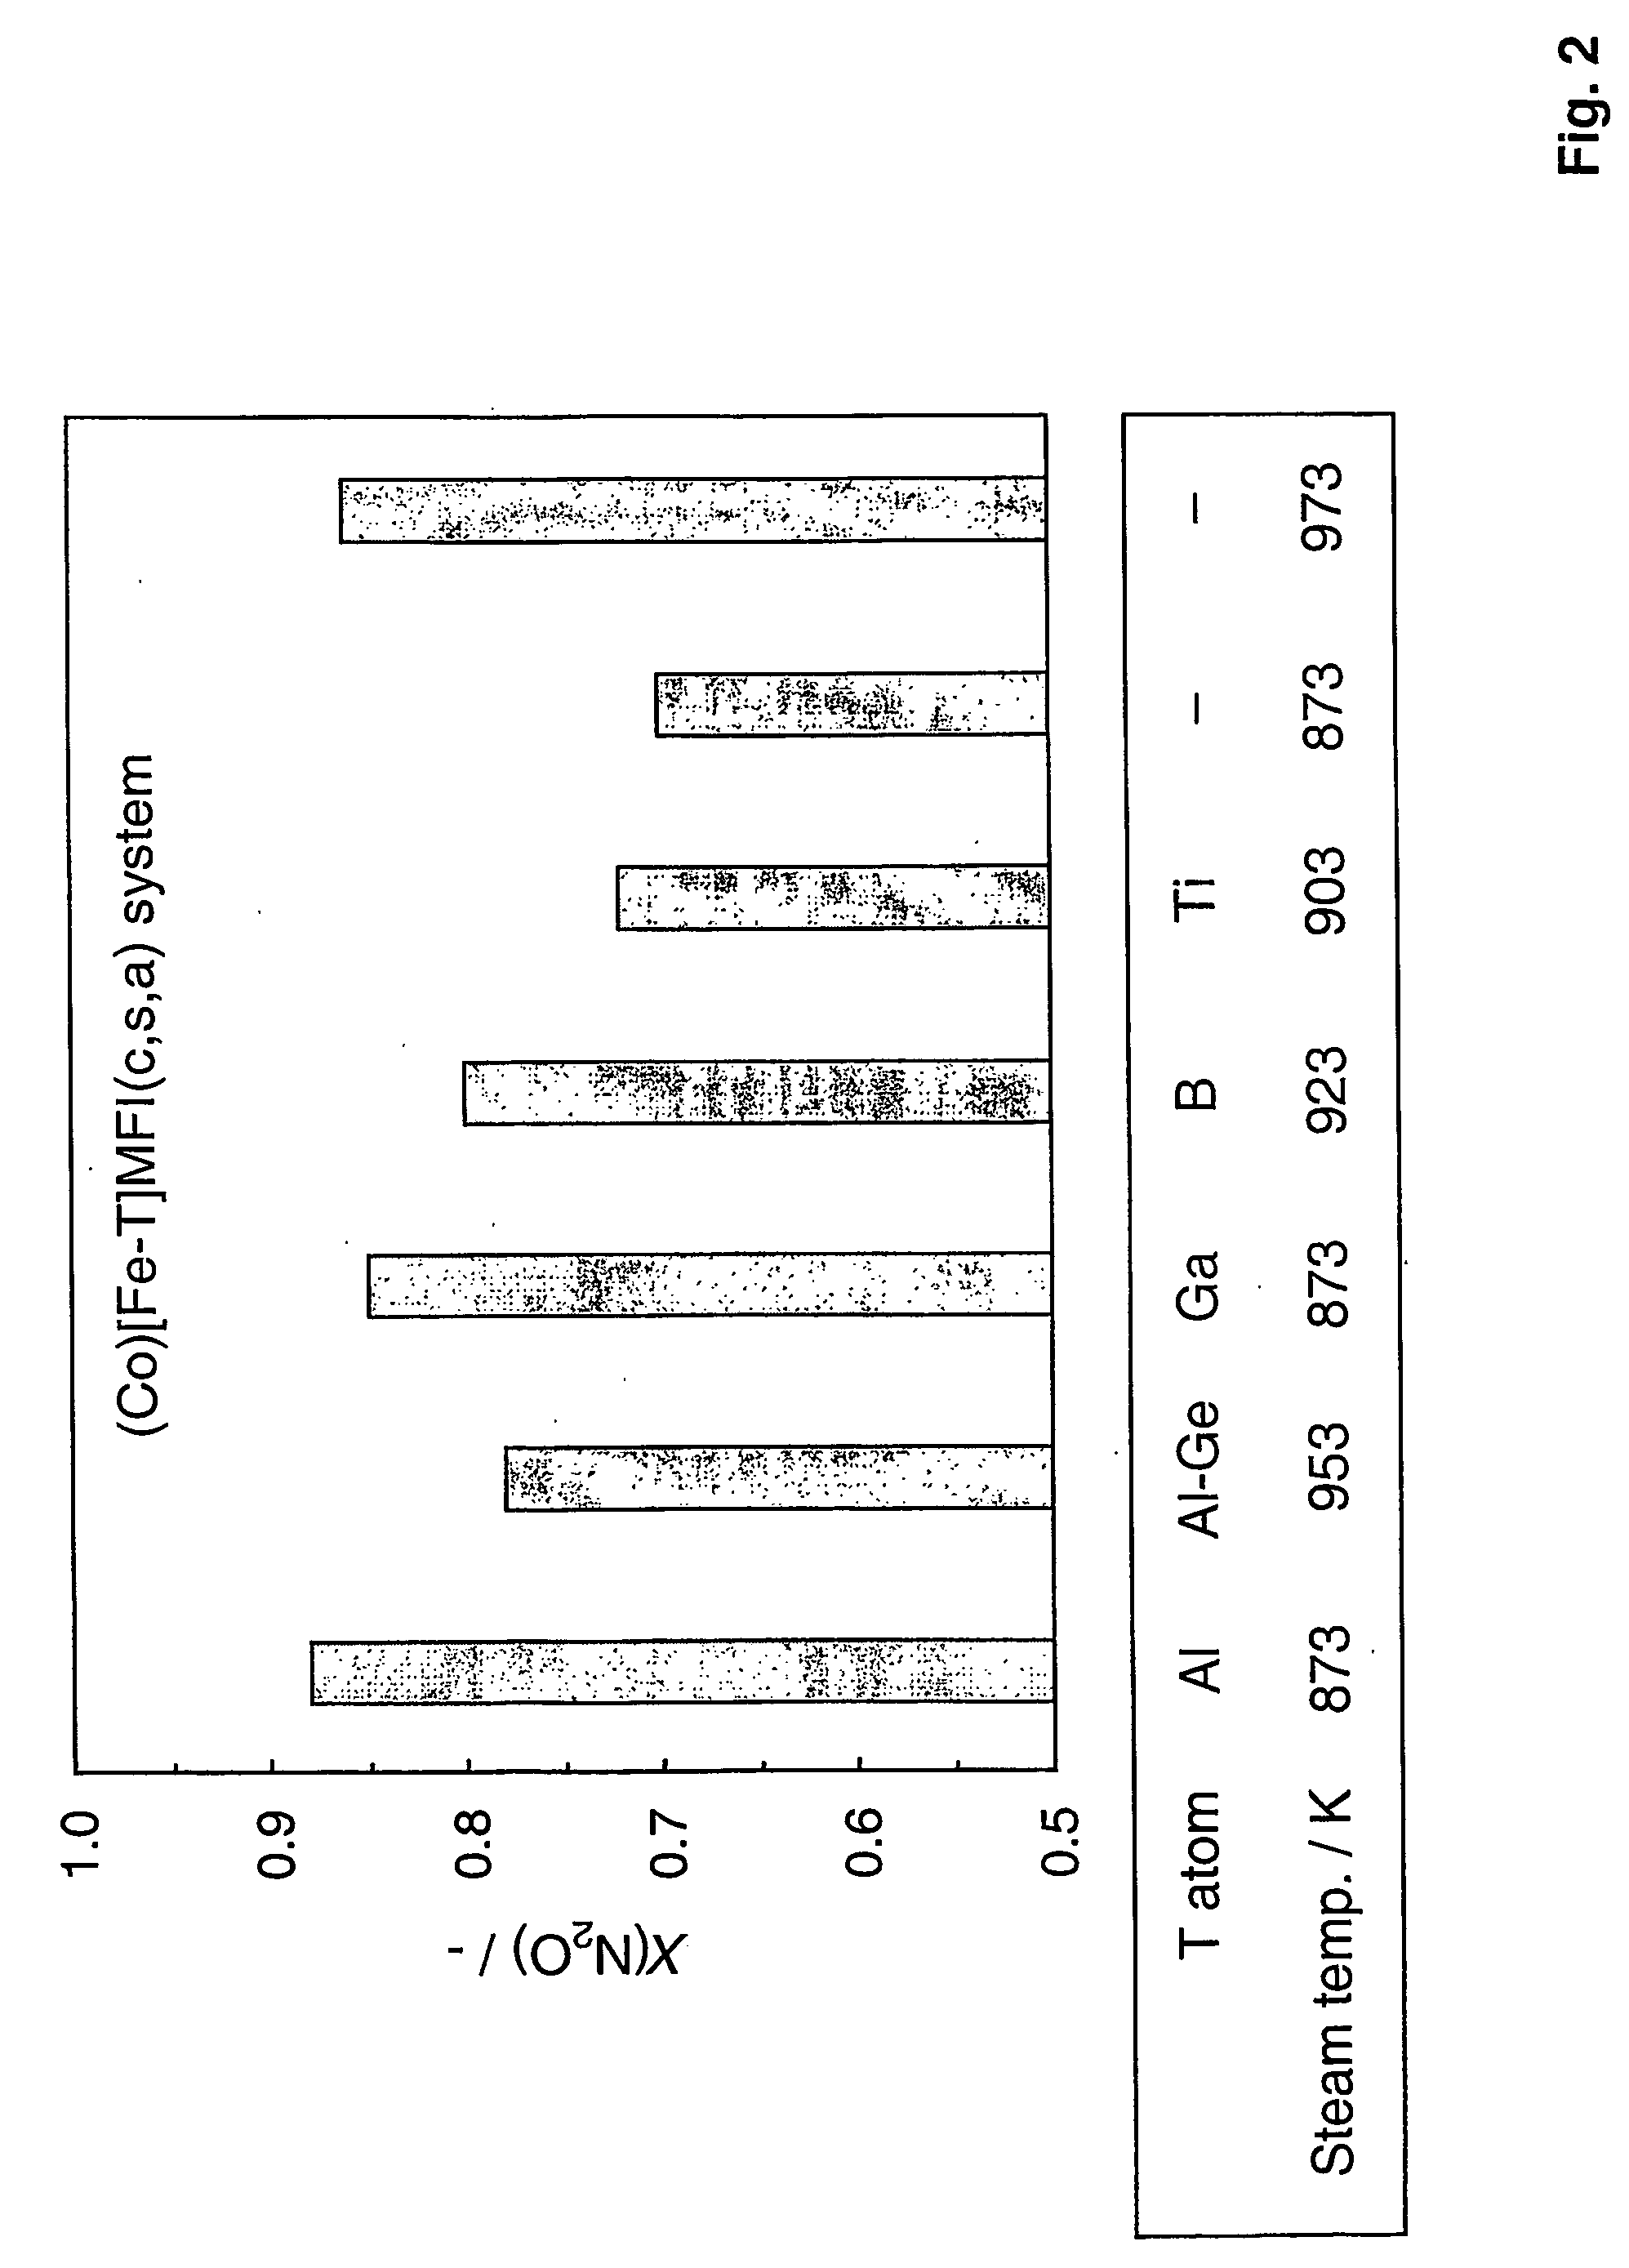 Method for preparation and activation of multimetallic zeolite catalysts, a catalyst composition and application for n2o abatement